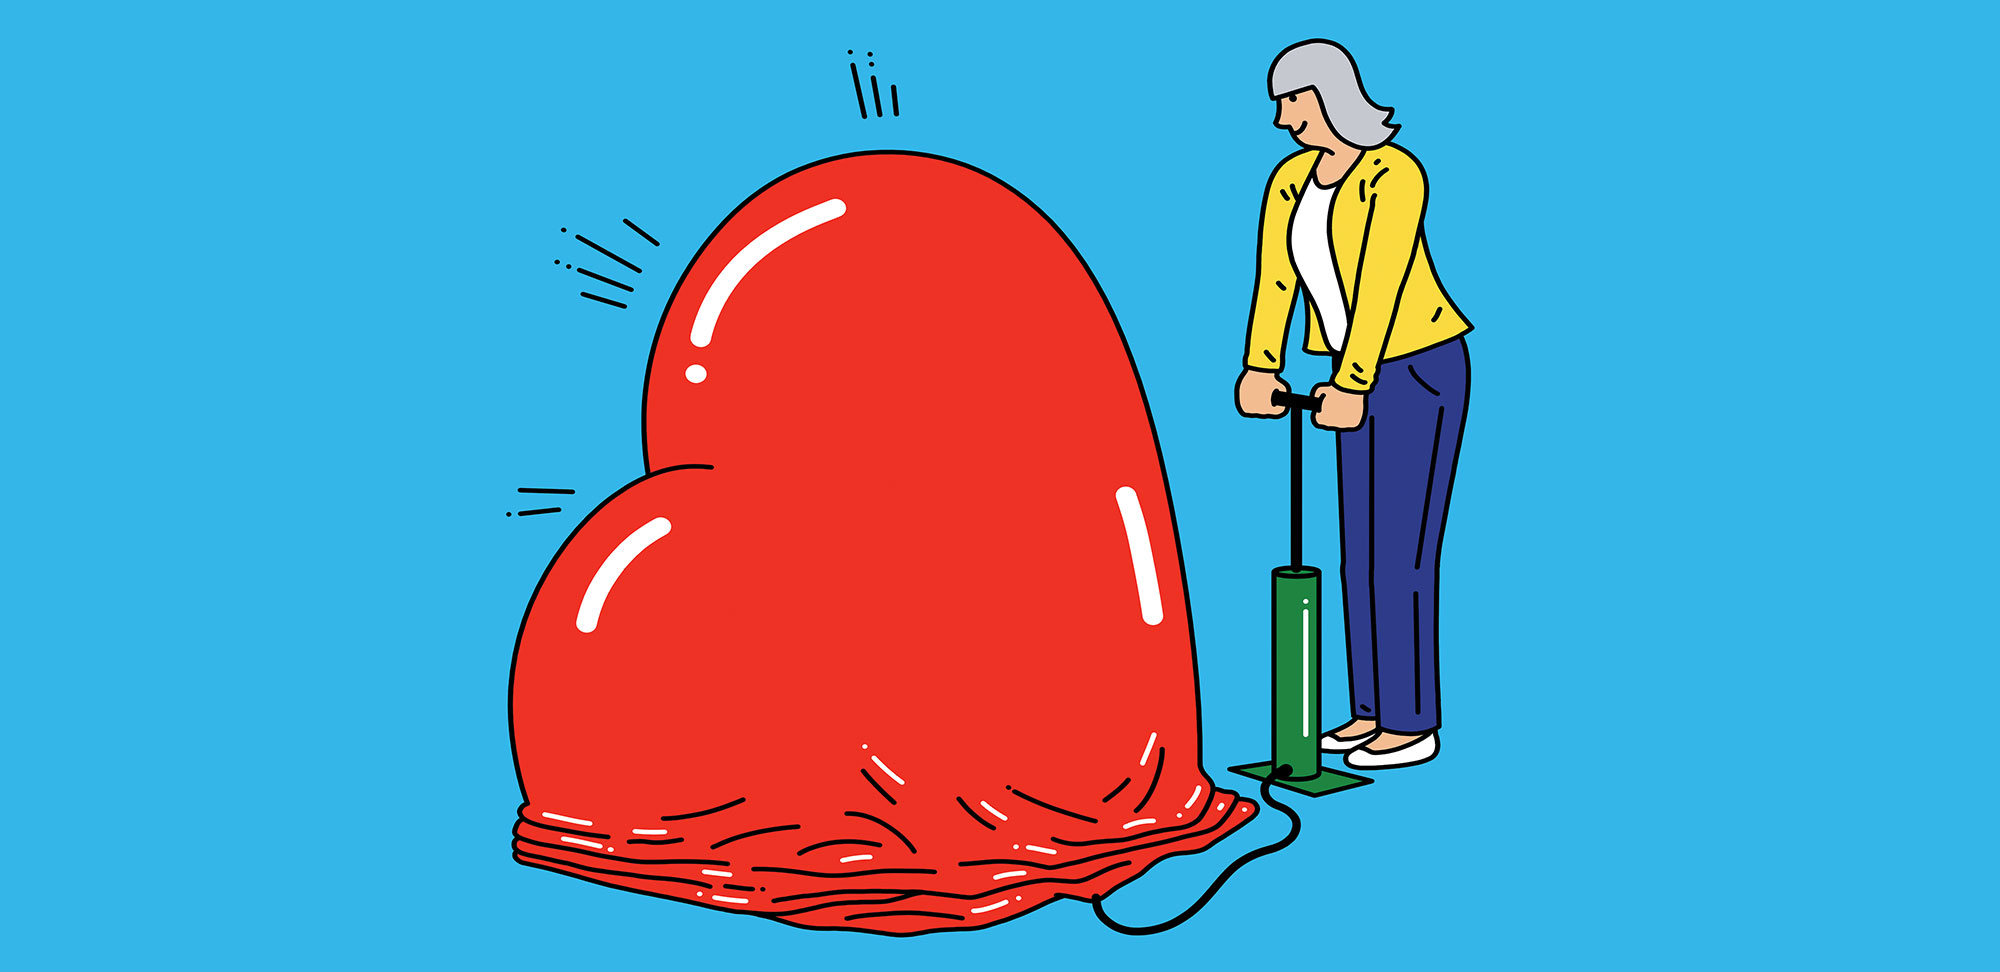 Conceptual illustration of person blowing up a heart shaped balloon